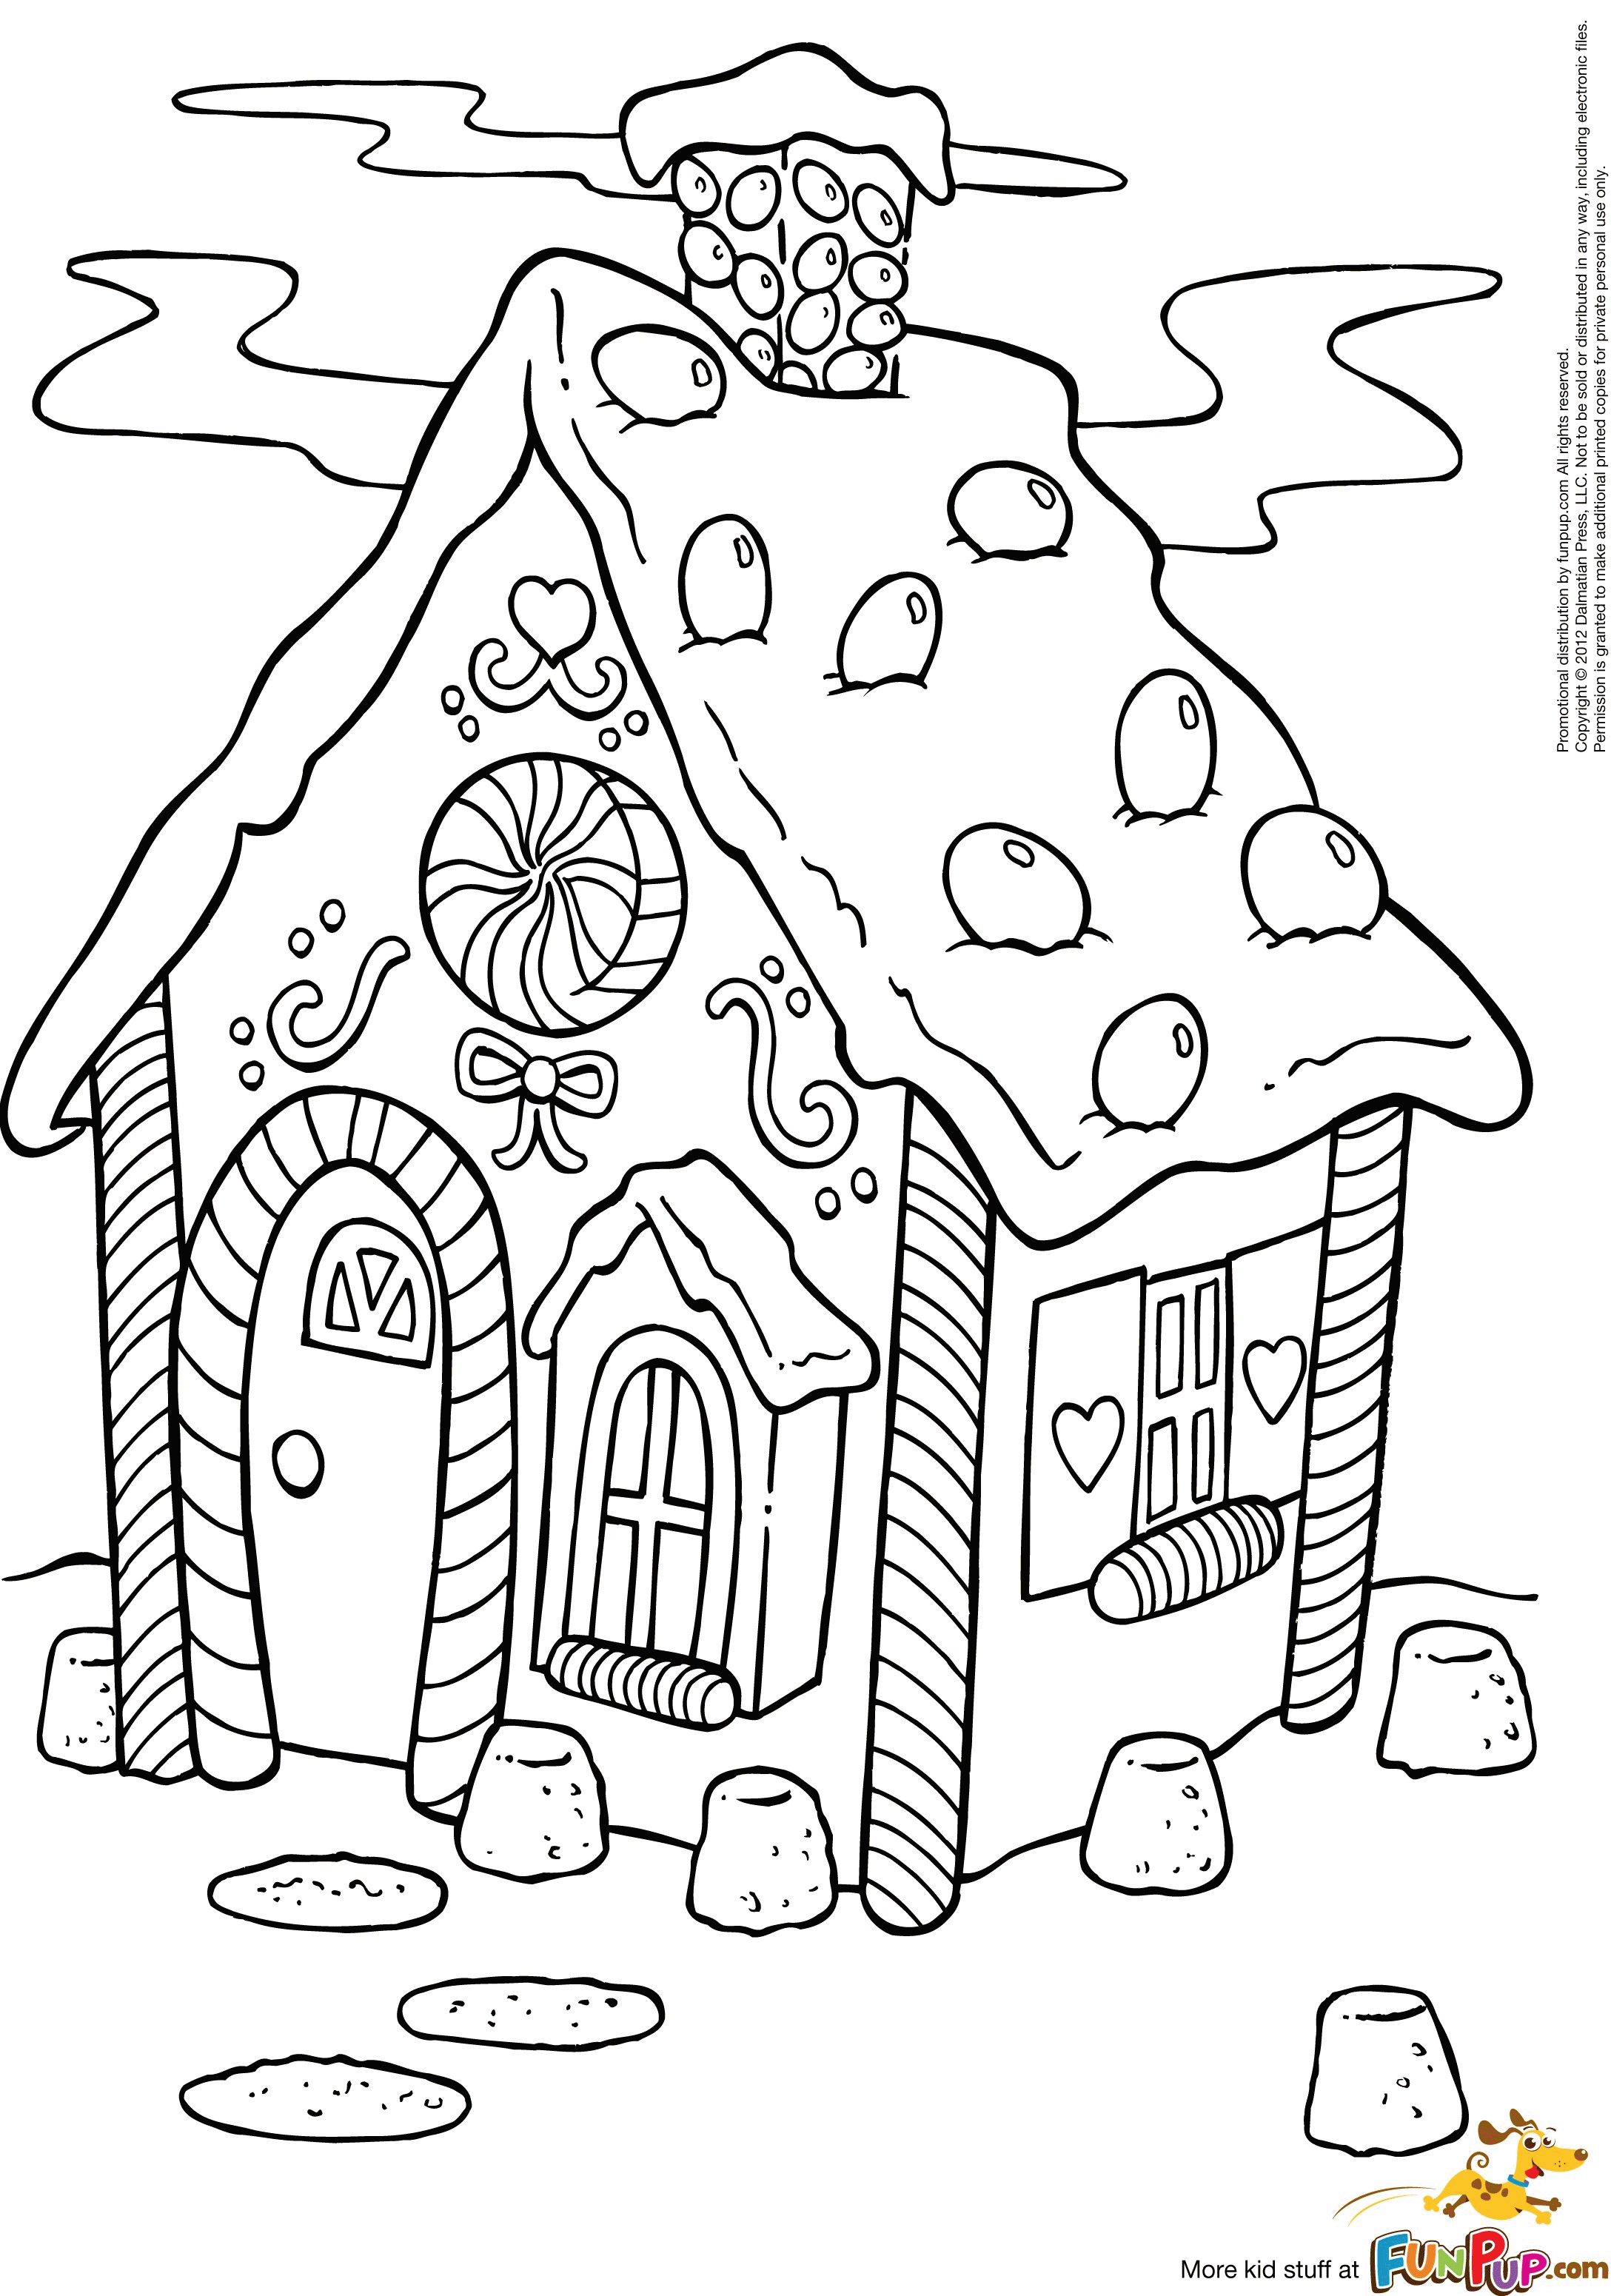 candy house coloring page